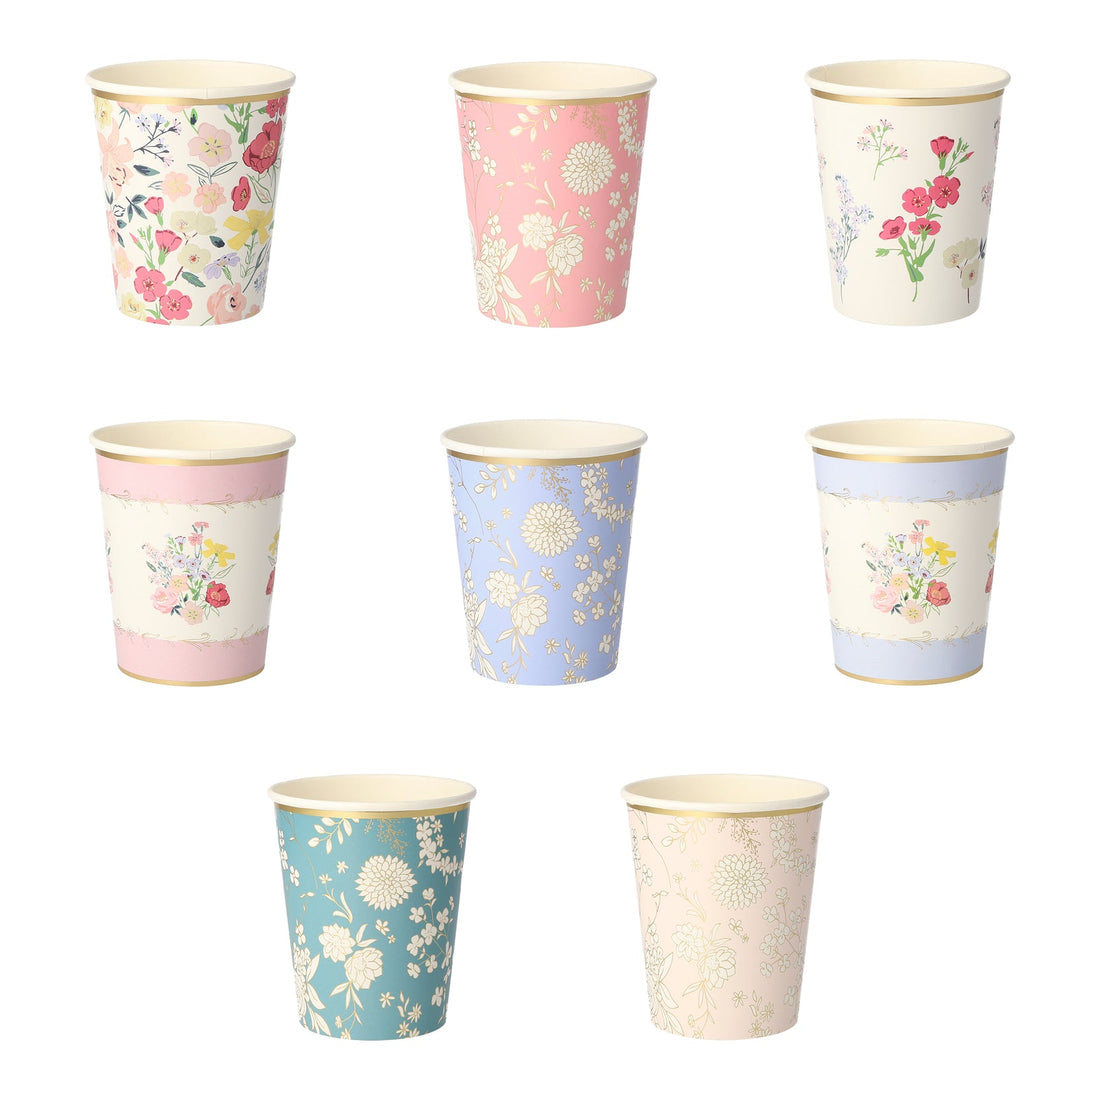 A collection of nine Meri Meri English Garden Party Cups with various floral designs.